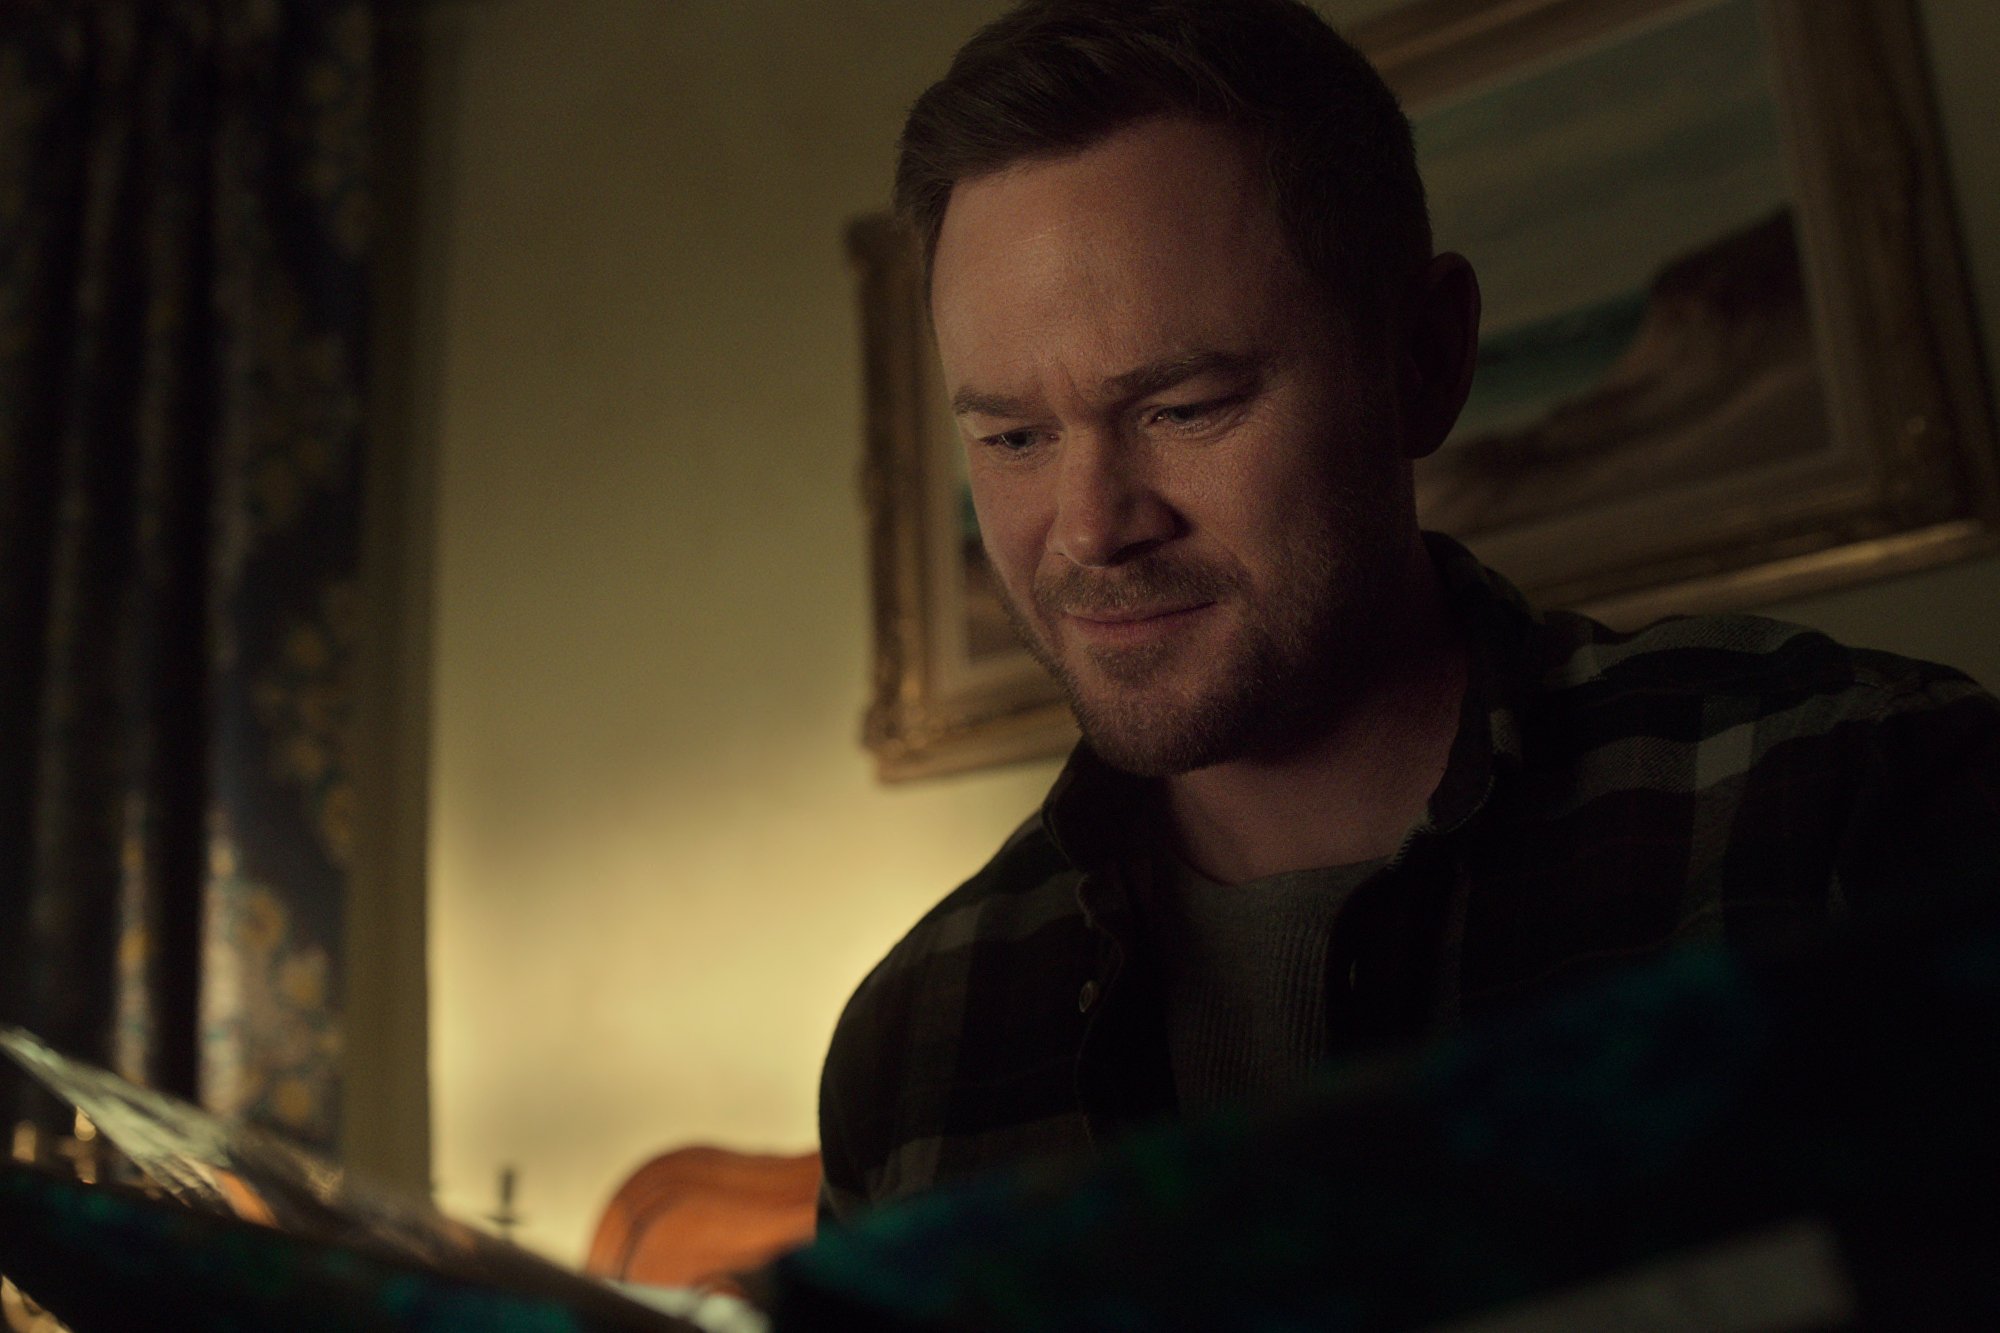 Aaron Ashmore as Duncan Locke in 'Locke & Key' Season 2 on Netflix. He's looking at a book and smiling.